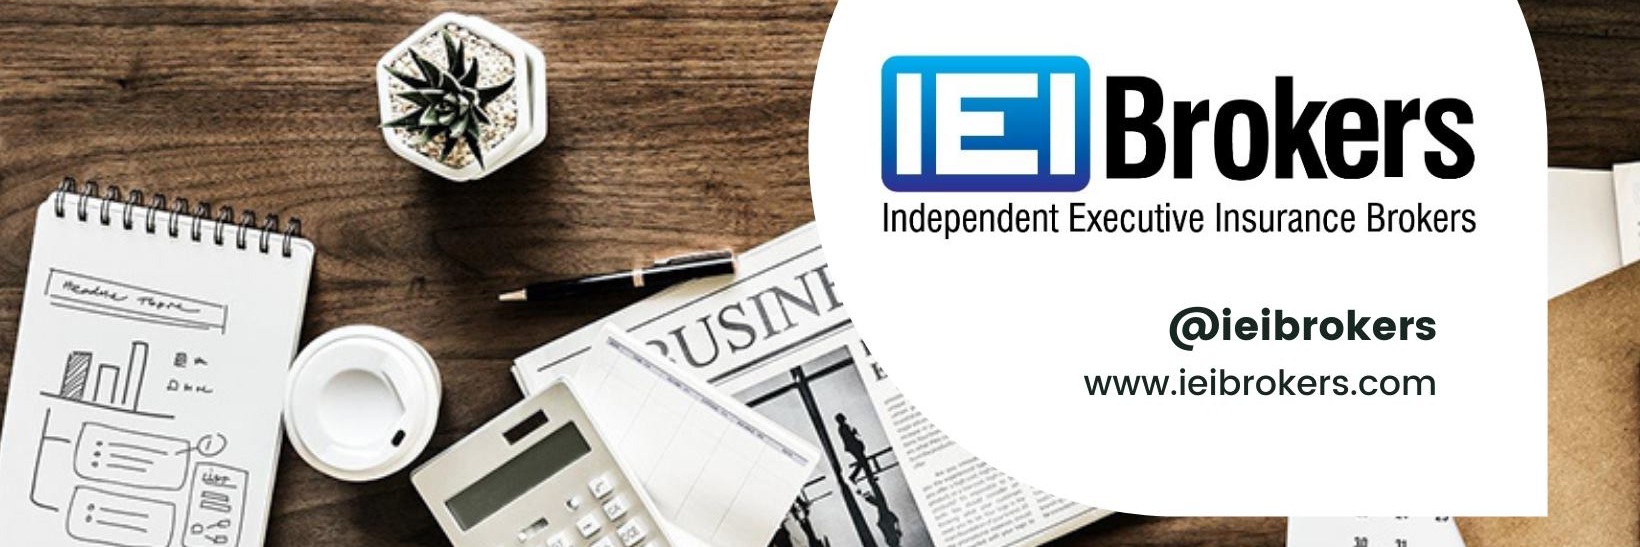 Banner of Independent Executive Insurance Brokers